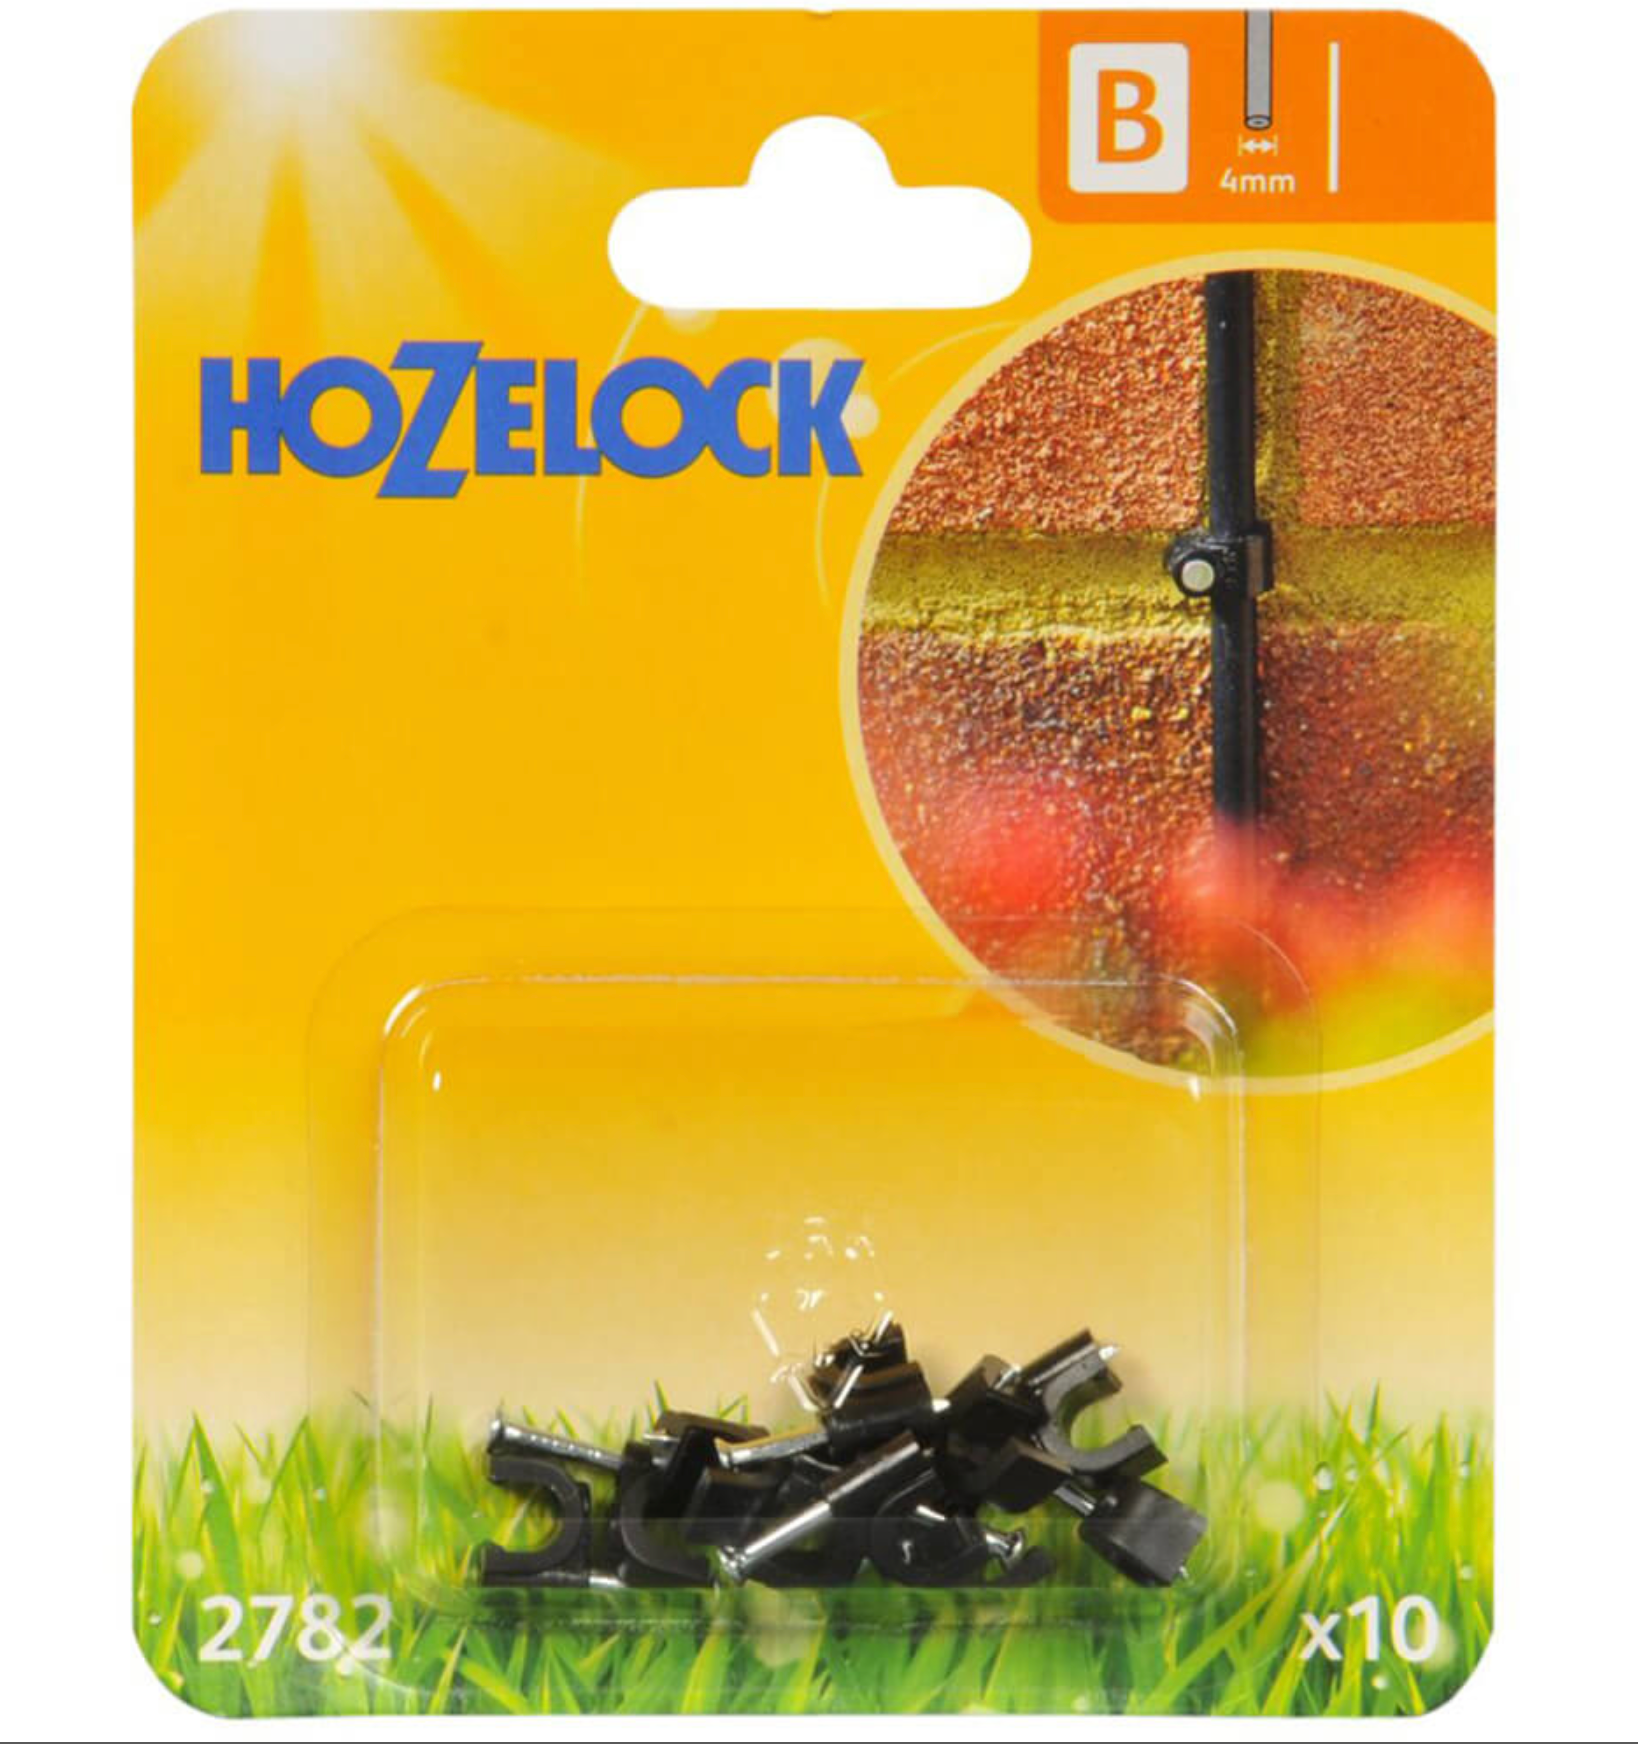 Hozelock 2782 Wall Clips 4mm - Pack of 10